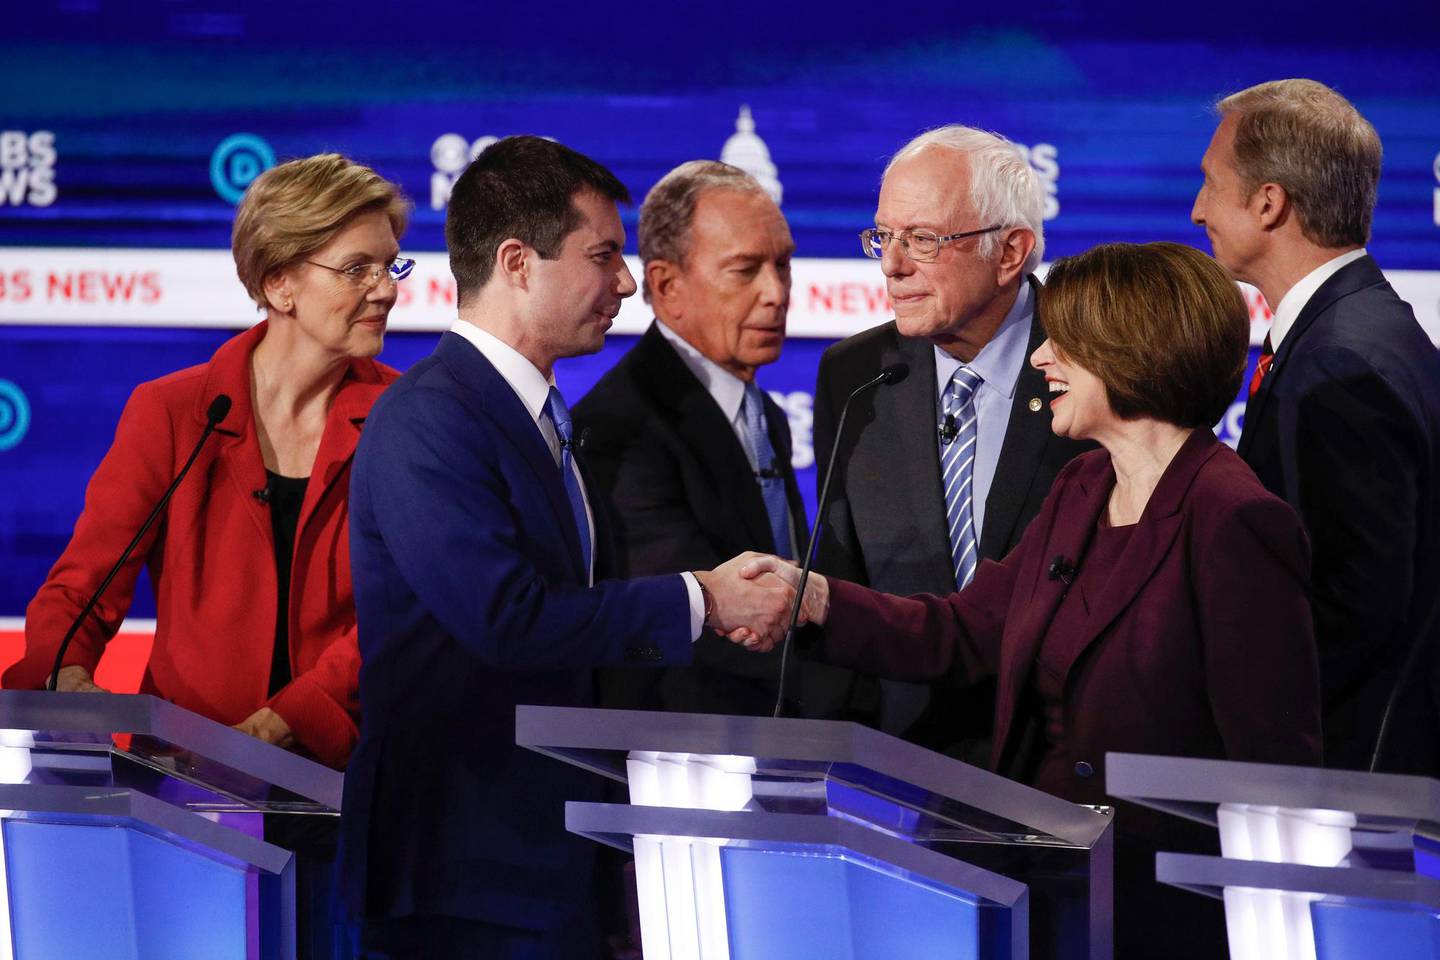 From left, Democratic presidential candidates, Sen. Elizabeth Warren, D-Mass., former South Bend Mayor Pete Buttigieg, former New York City Mayor Mike Bloomberg, Sen. Bernie Sanders, I-Vt., Sen. Amy Klobuchar, D-Minn., and businessman Tom Steyer, greet on another on stage at the end of the Democratic presidential primary debate at the Gaillard Center, Tuesday, Feb. 25, 2020, in Charleston, S.C., co-hosted by CBS News and the Congressional Black Caucus Institute. (AP Photo/Patrick Semansky)